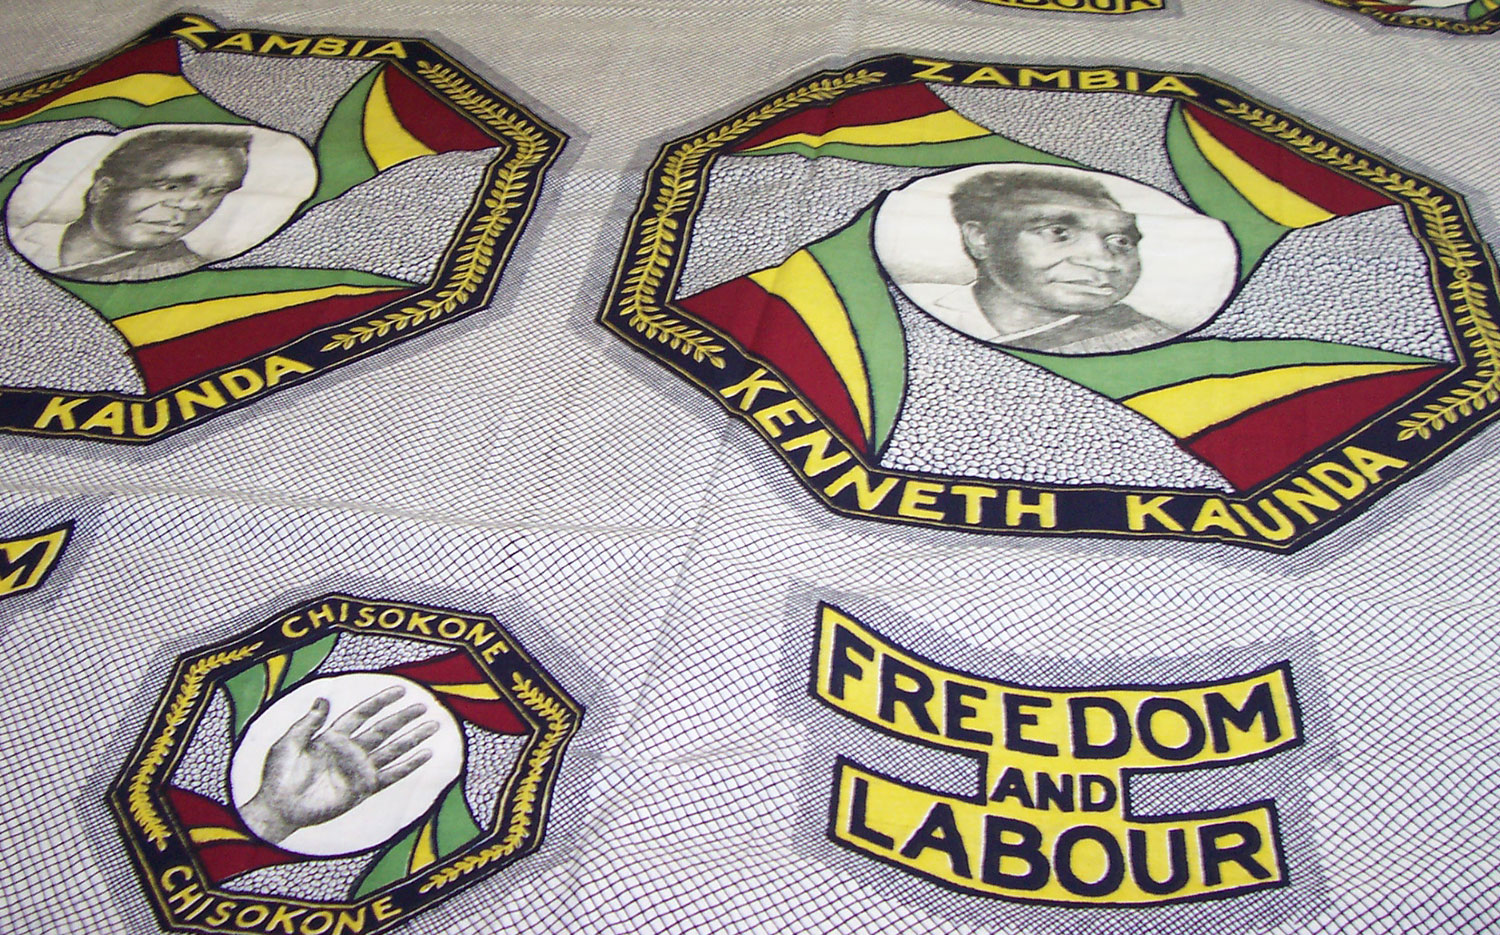 Cotton cloth printed to celebrate first President Kaunda of Zambia following Independence in 1964: Africa, Southern Africa, Zambia, 1964.